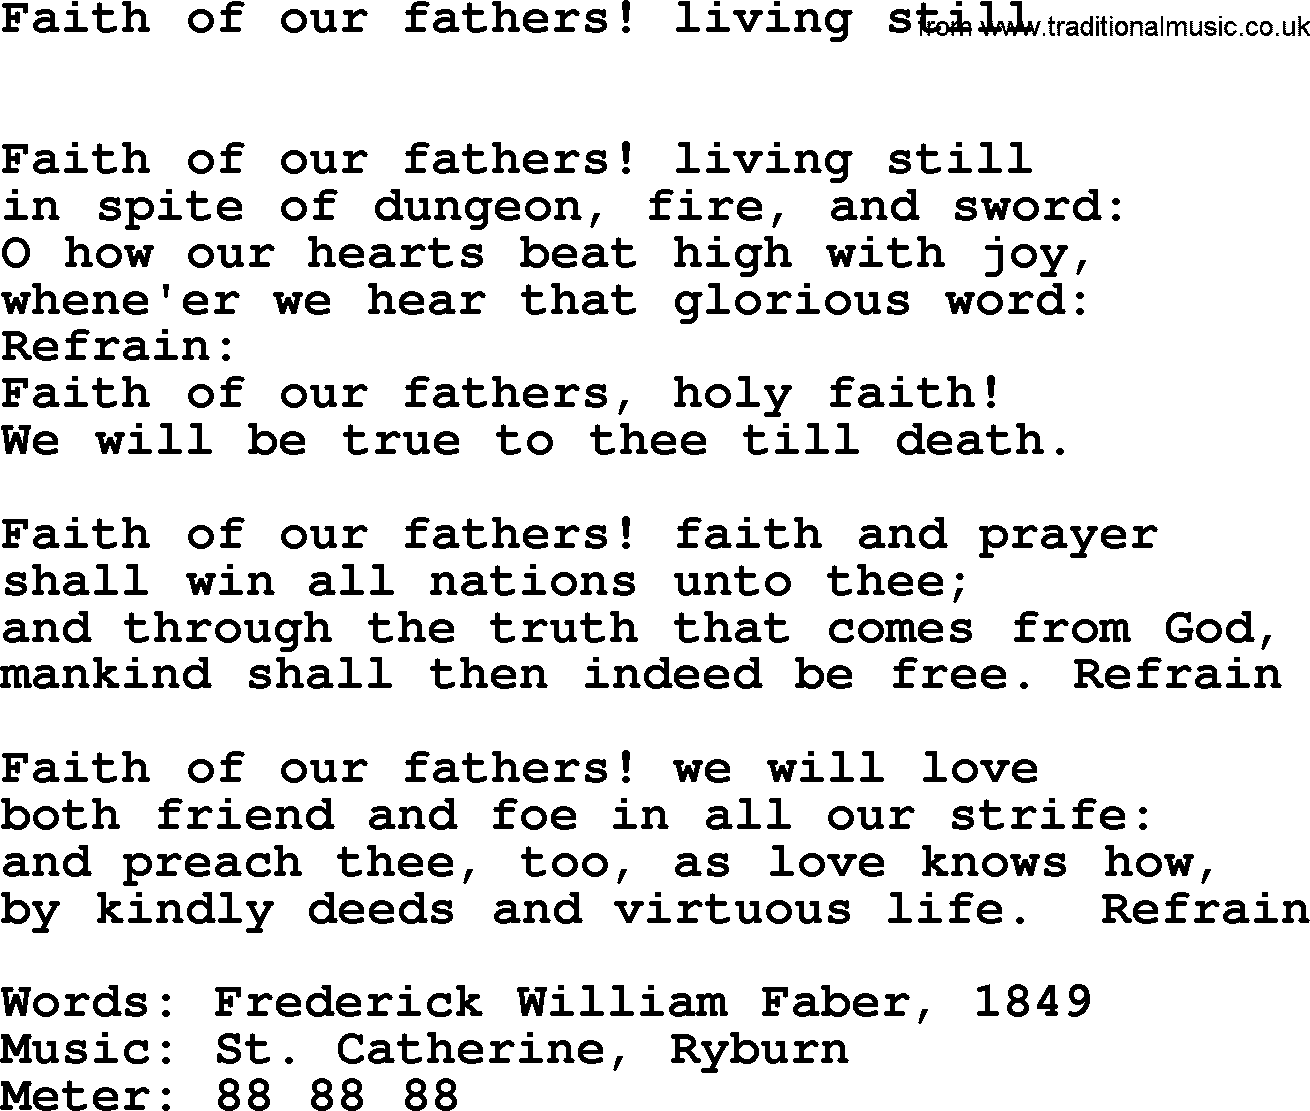 Book of Common Praise Hymn: Faith Of Our Fathers! Living Still.txt lyrics with midi music